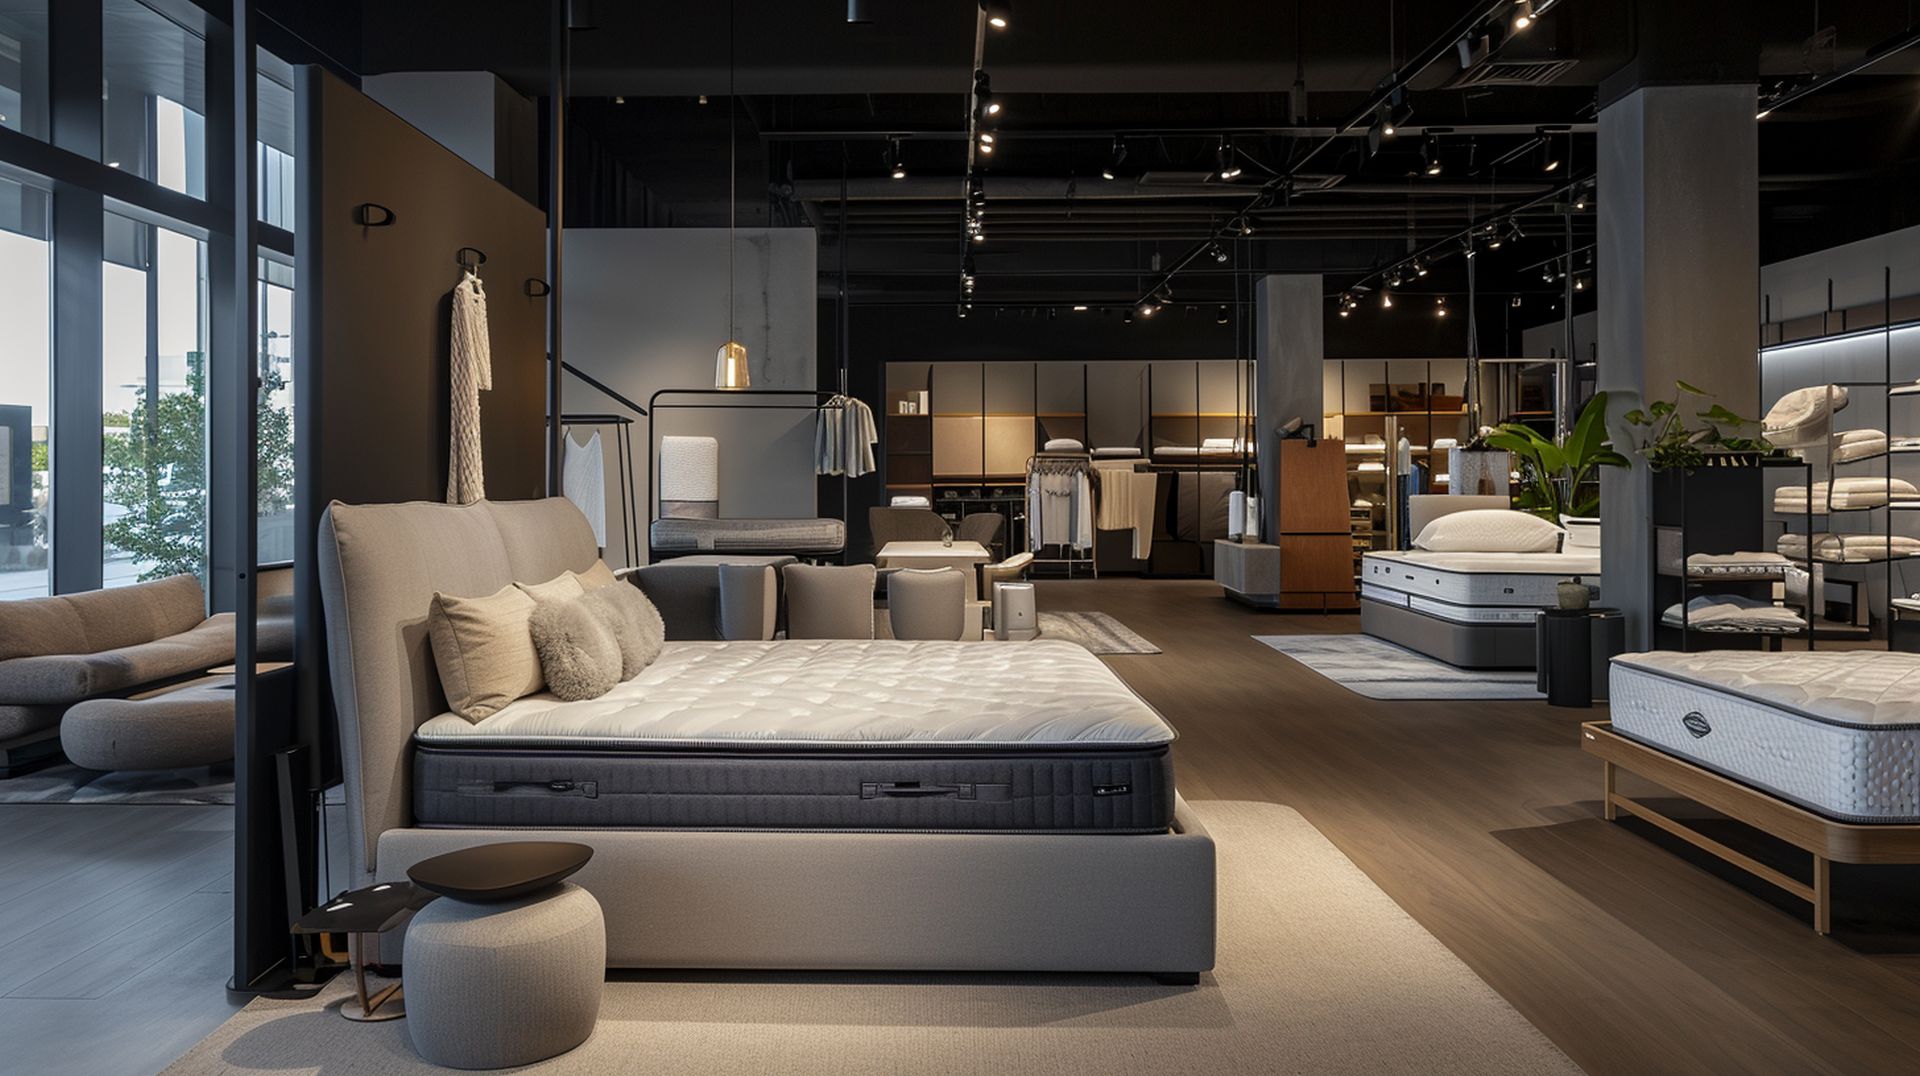 If you're looking for a new bed, mattress stores in Nashua offer the best customer and delivery service, financing, and warranties in New Hampshire